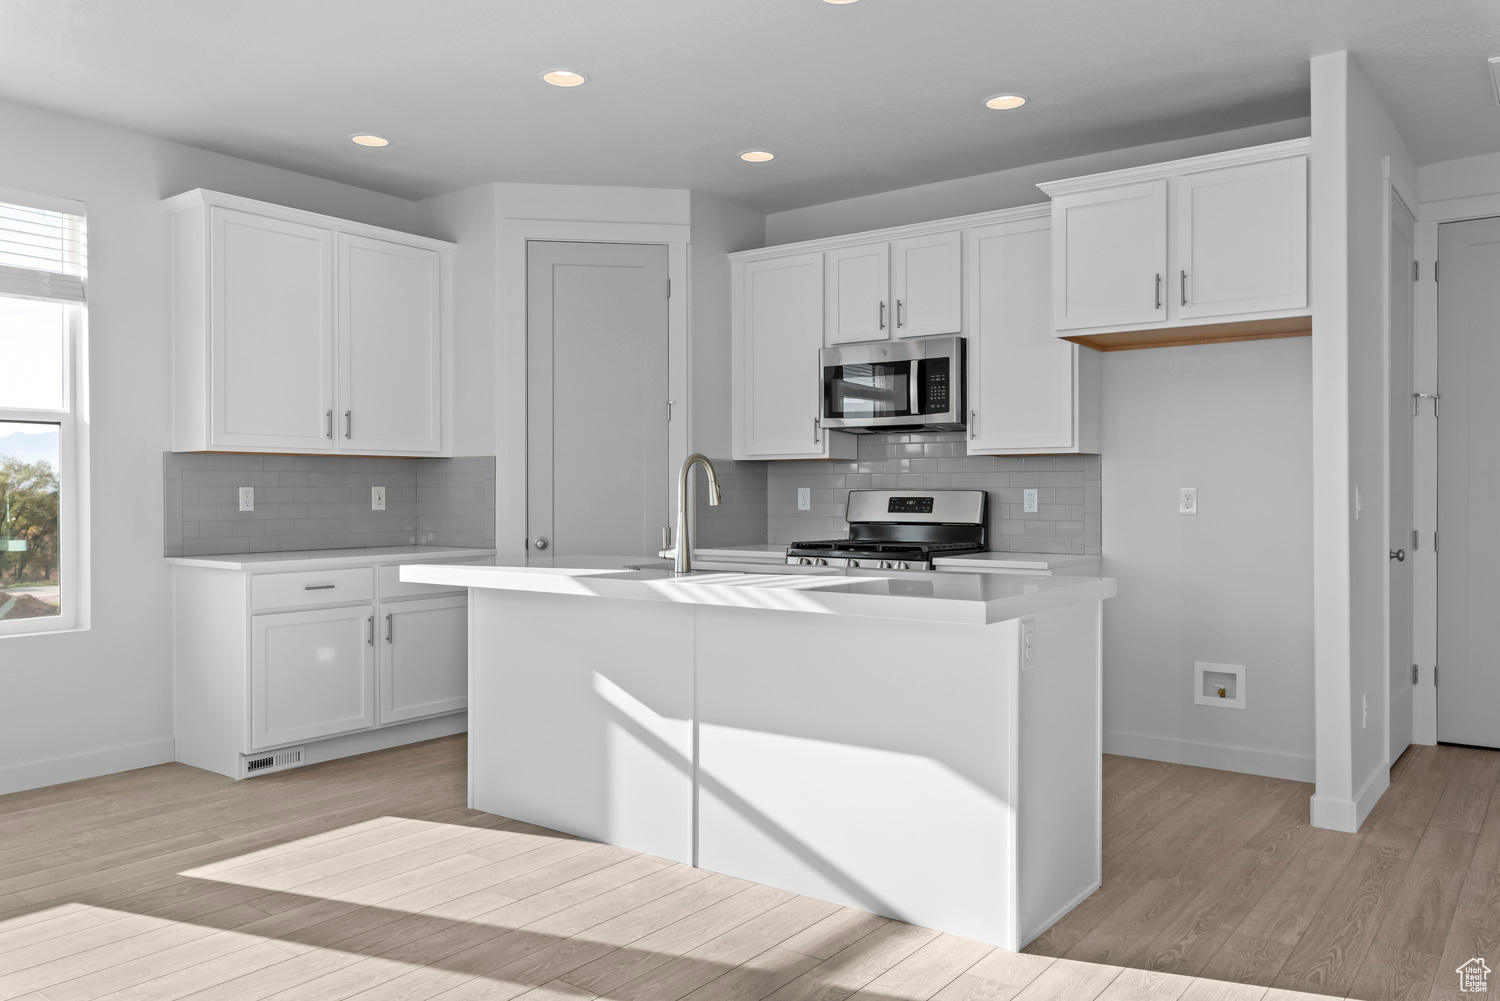 Kitchen with appliances with stainless steel finishes, white cabinets, and an island with sink